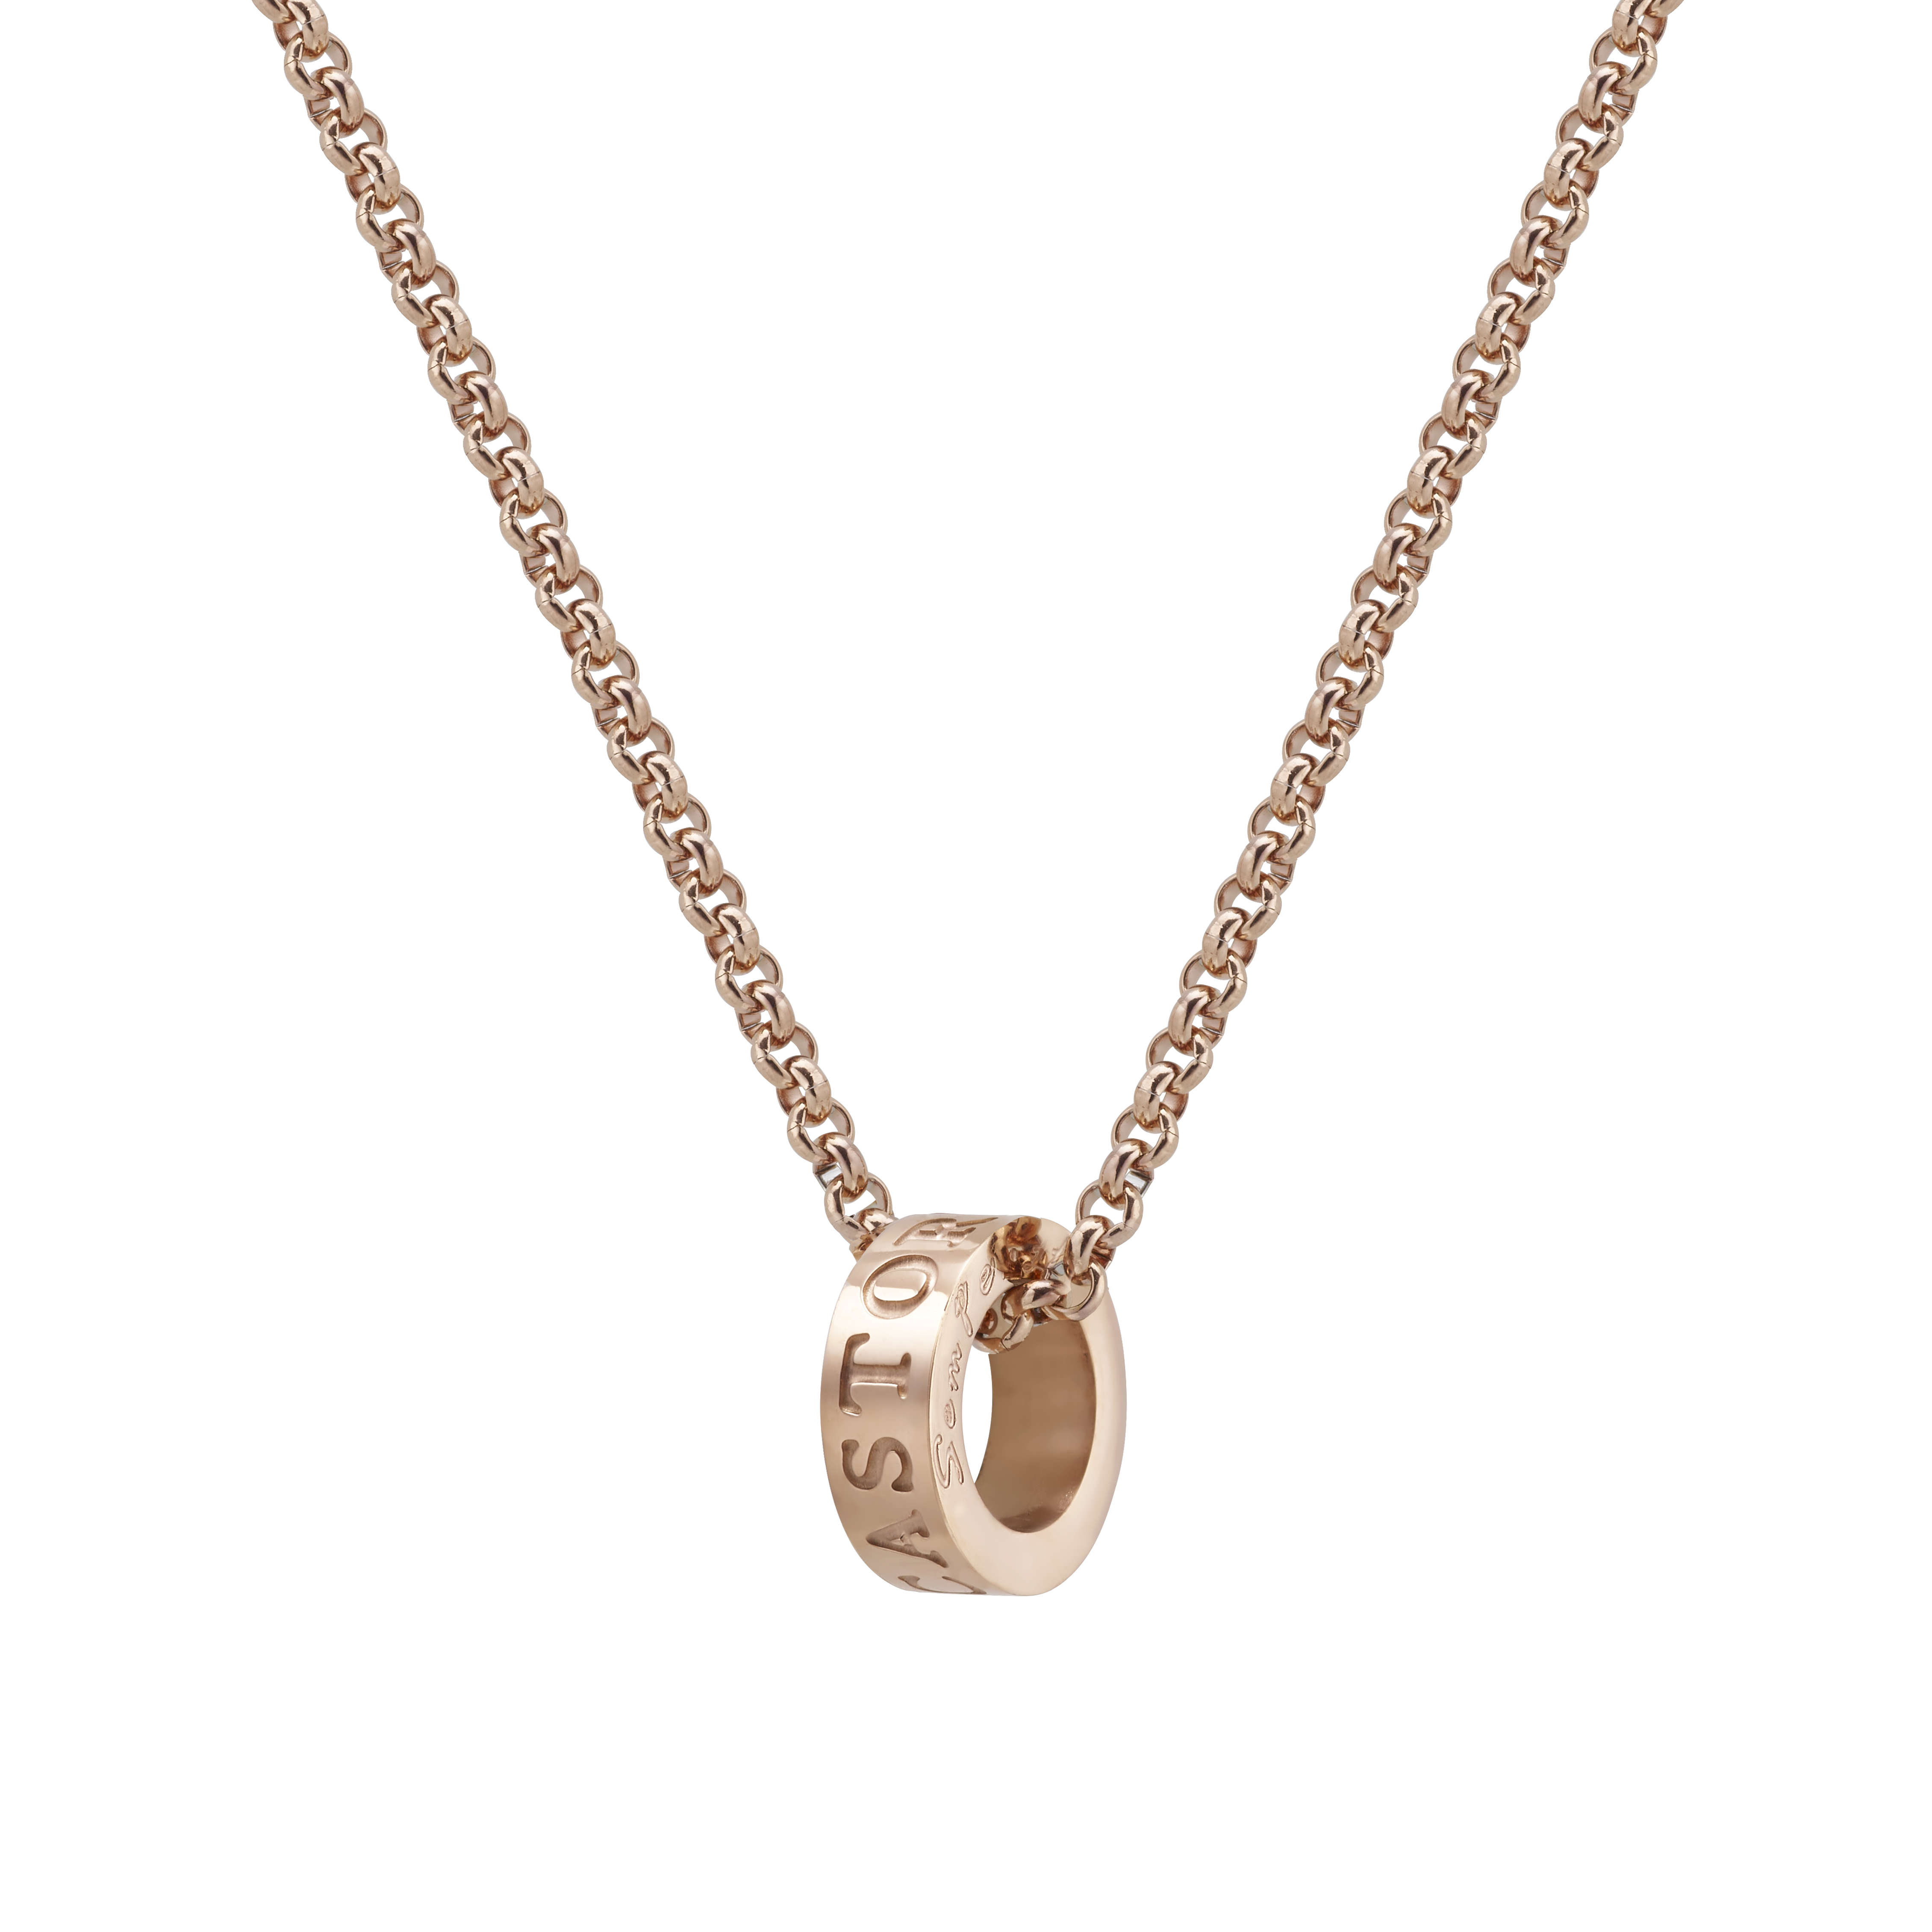 Incanto Timeless Necklace - S - RG [LN0025-RG]